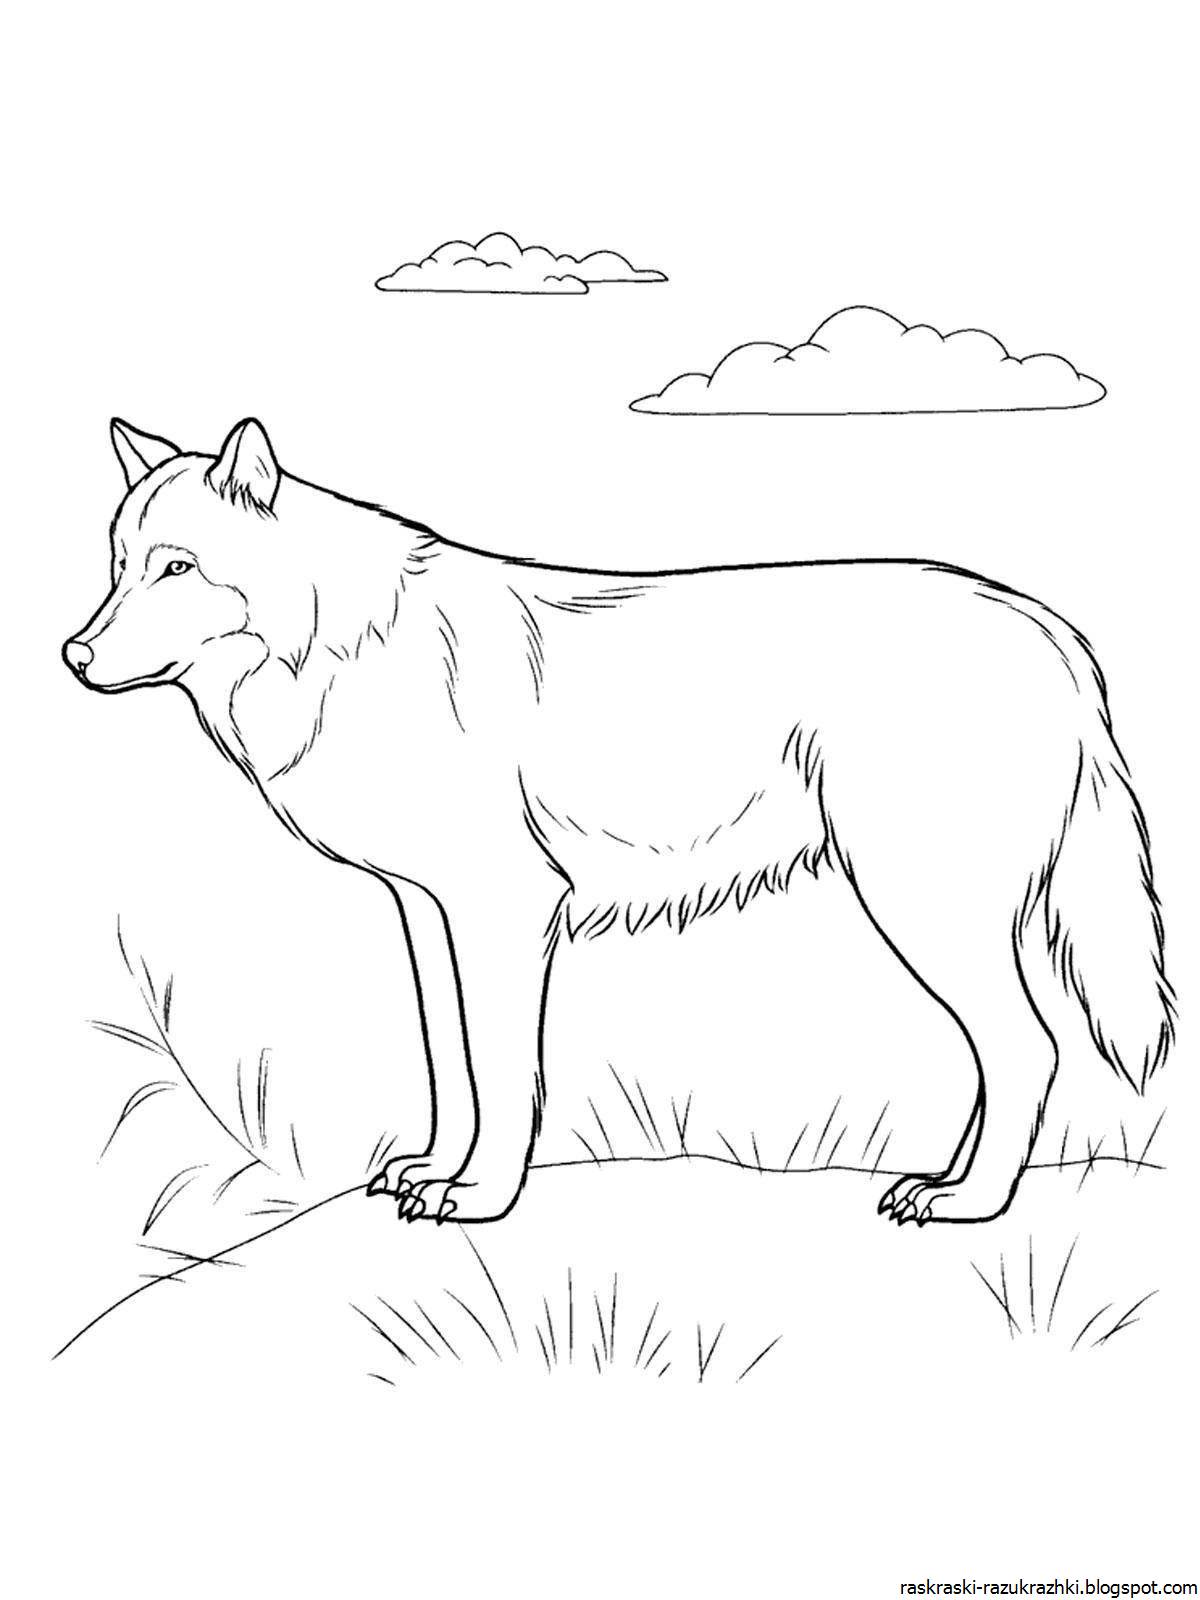 Awesome wild animal coloring page